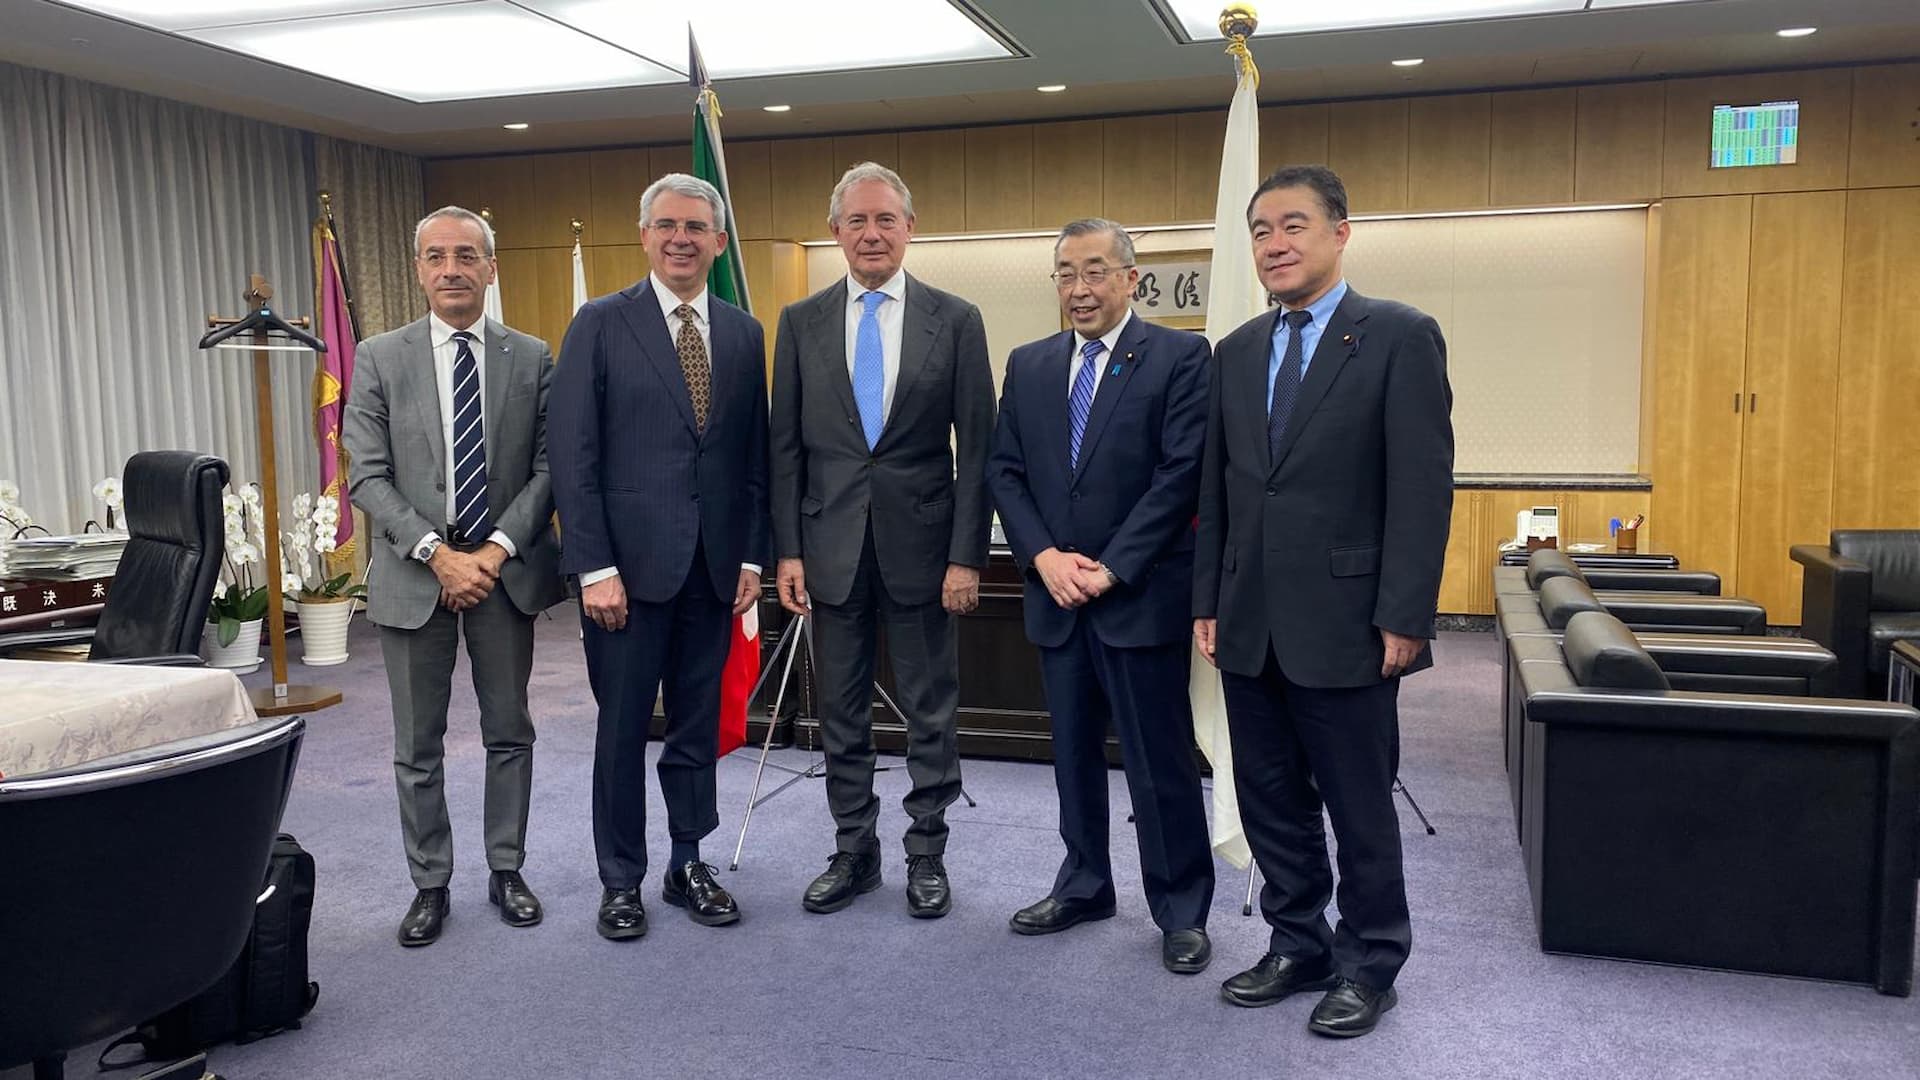 ASI - SPACE COLLABORATION BETWEEN ITALY AND JAPAN GROWS STRONGER